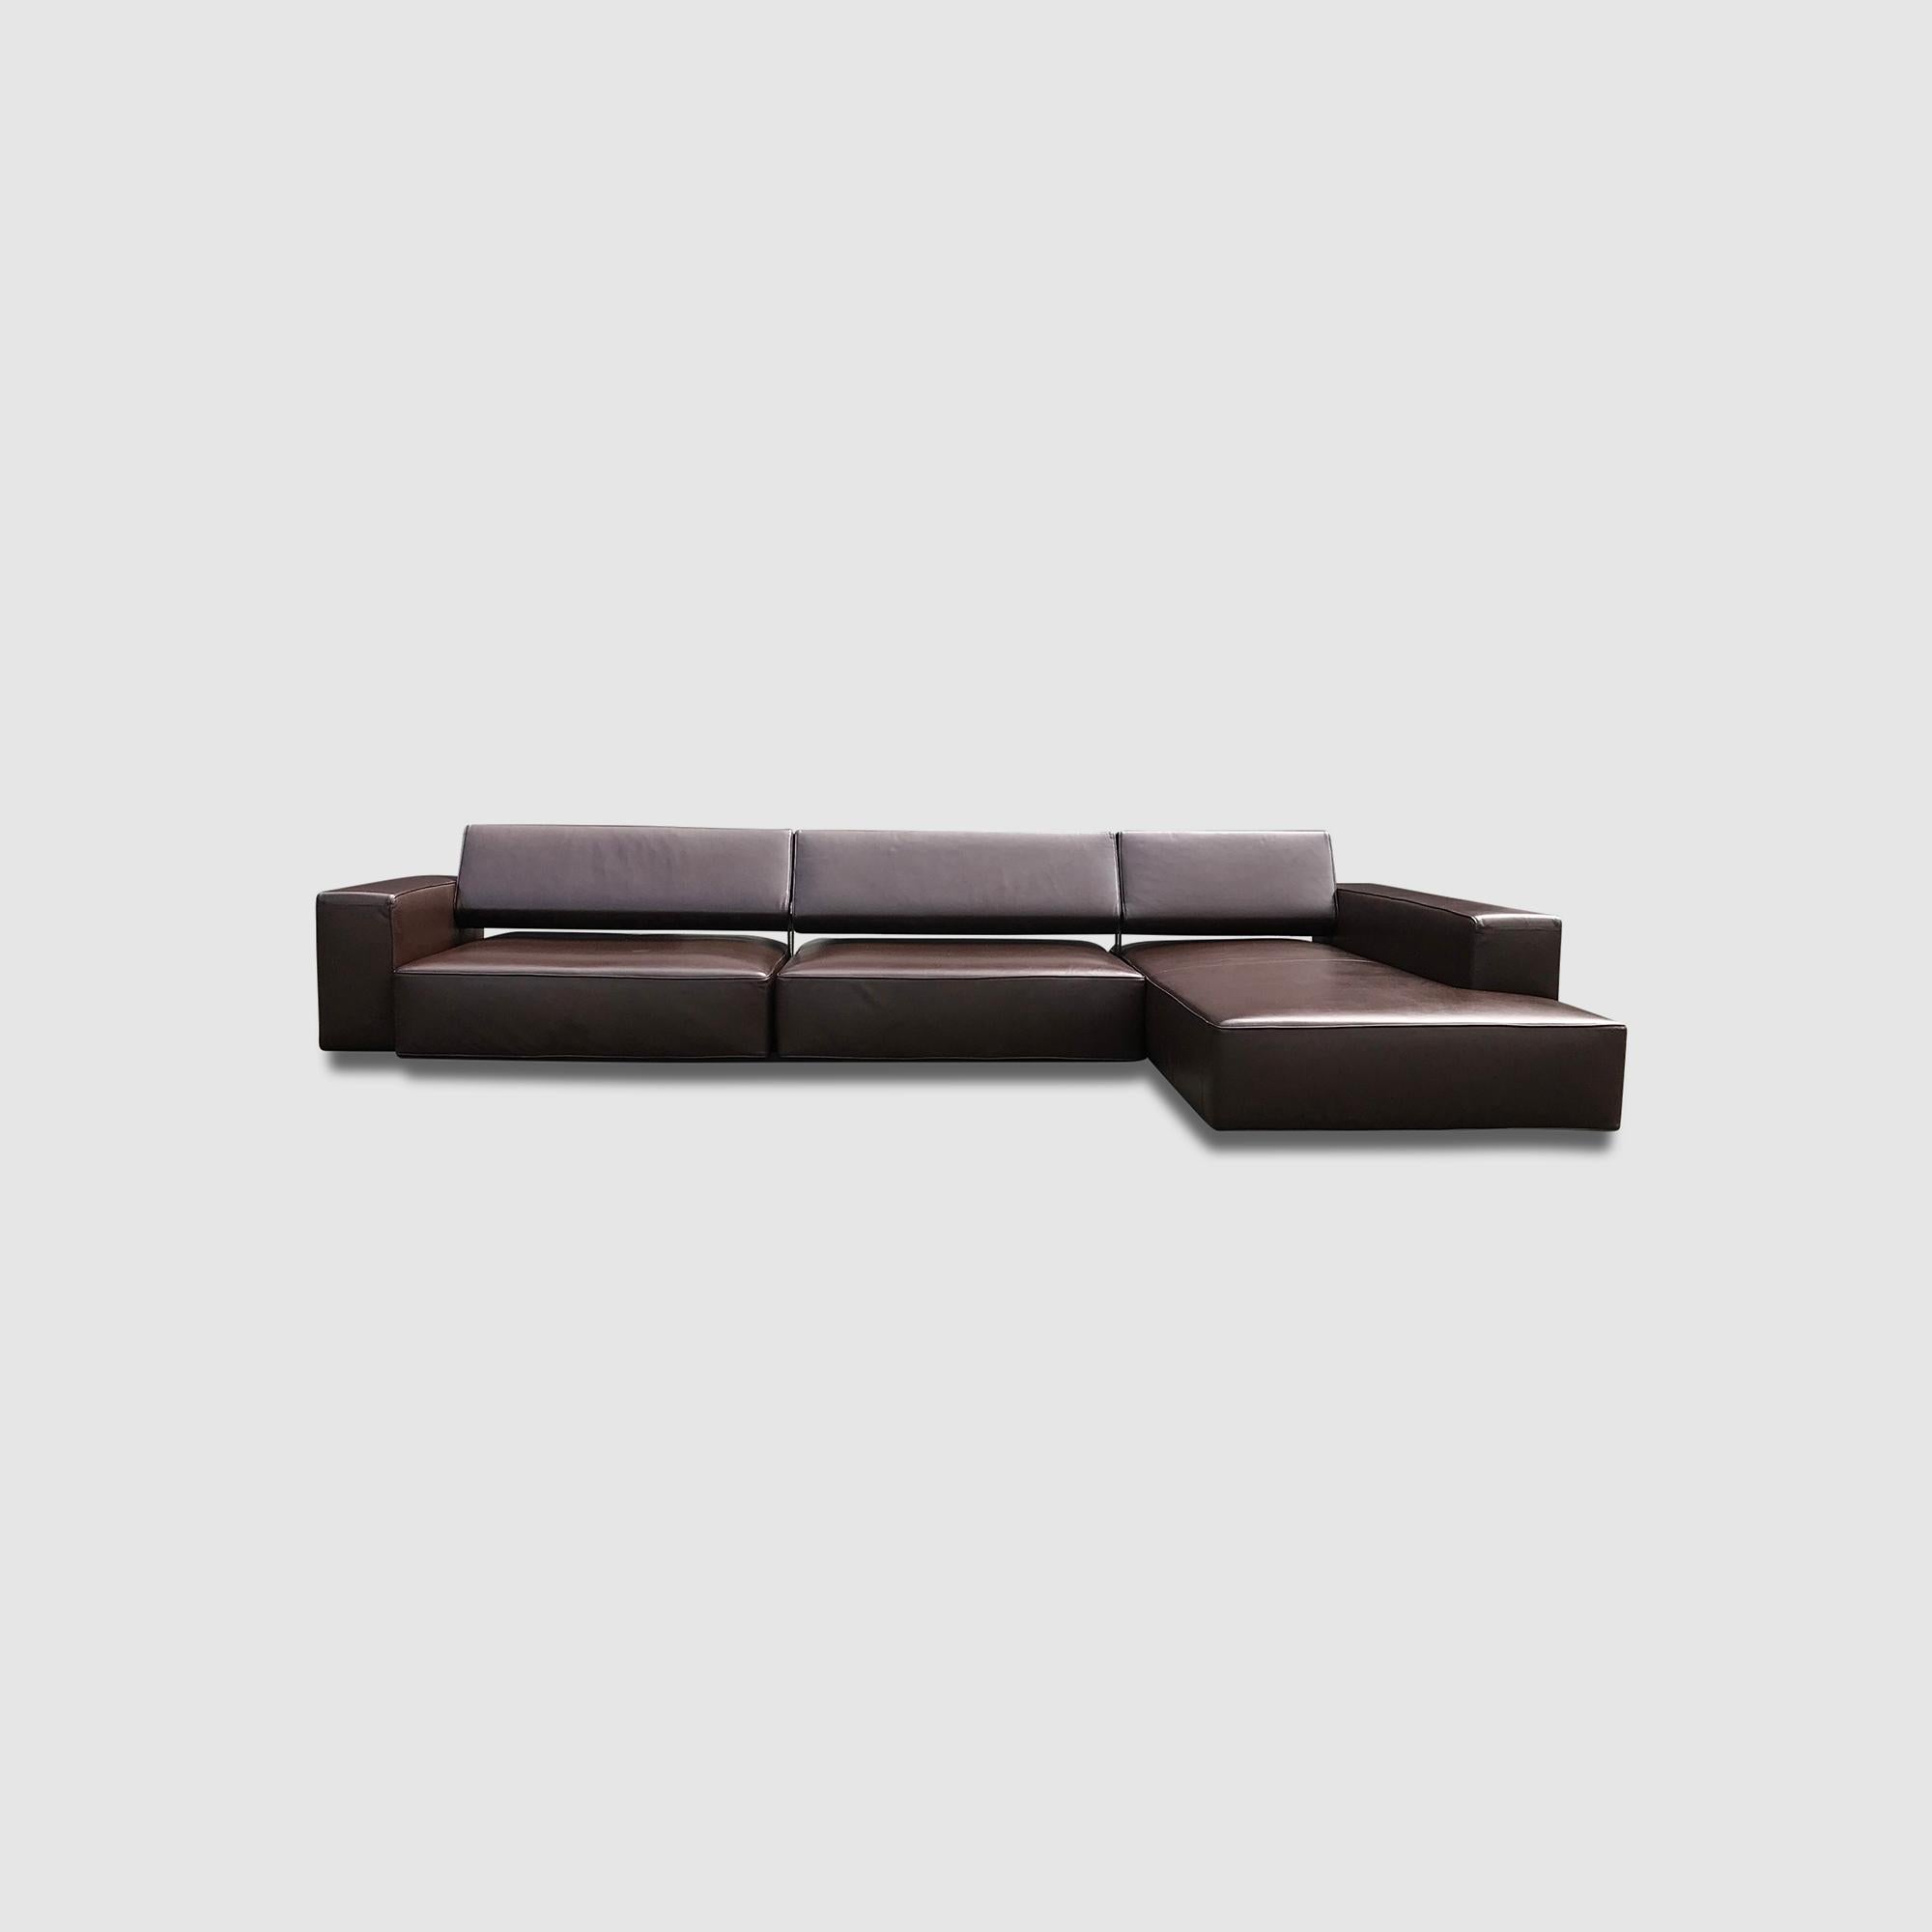 Modular Leather Andy Landscape Sofa by Paolo Piva for B&B Italia 2013 11